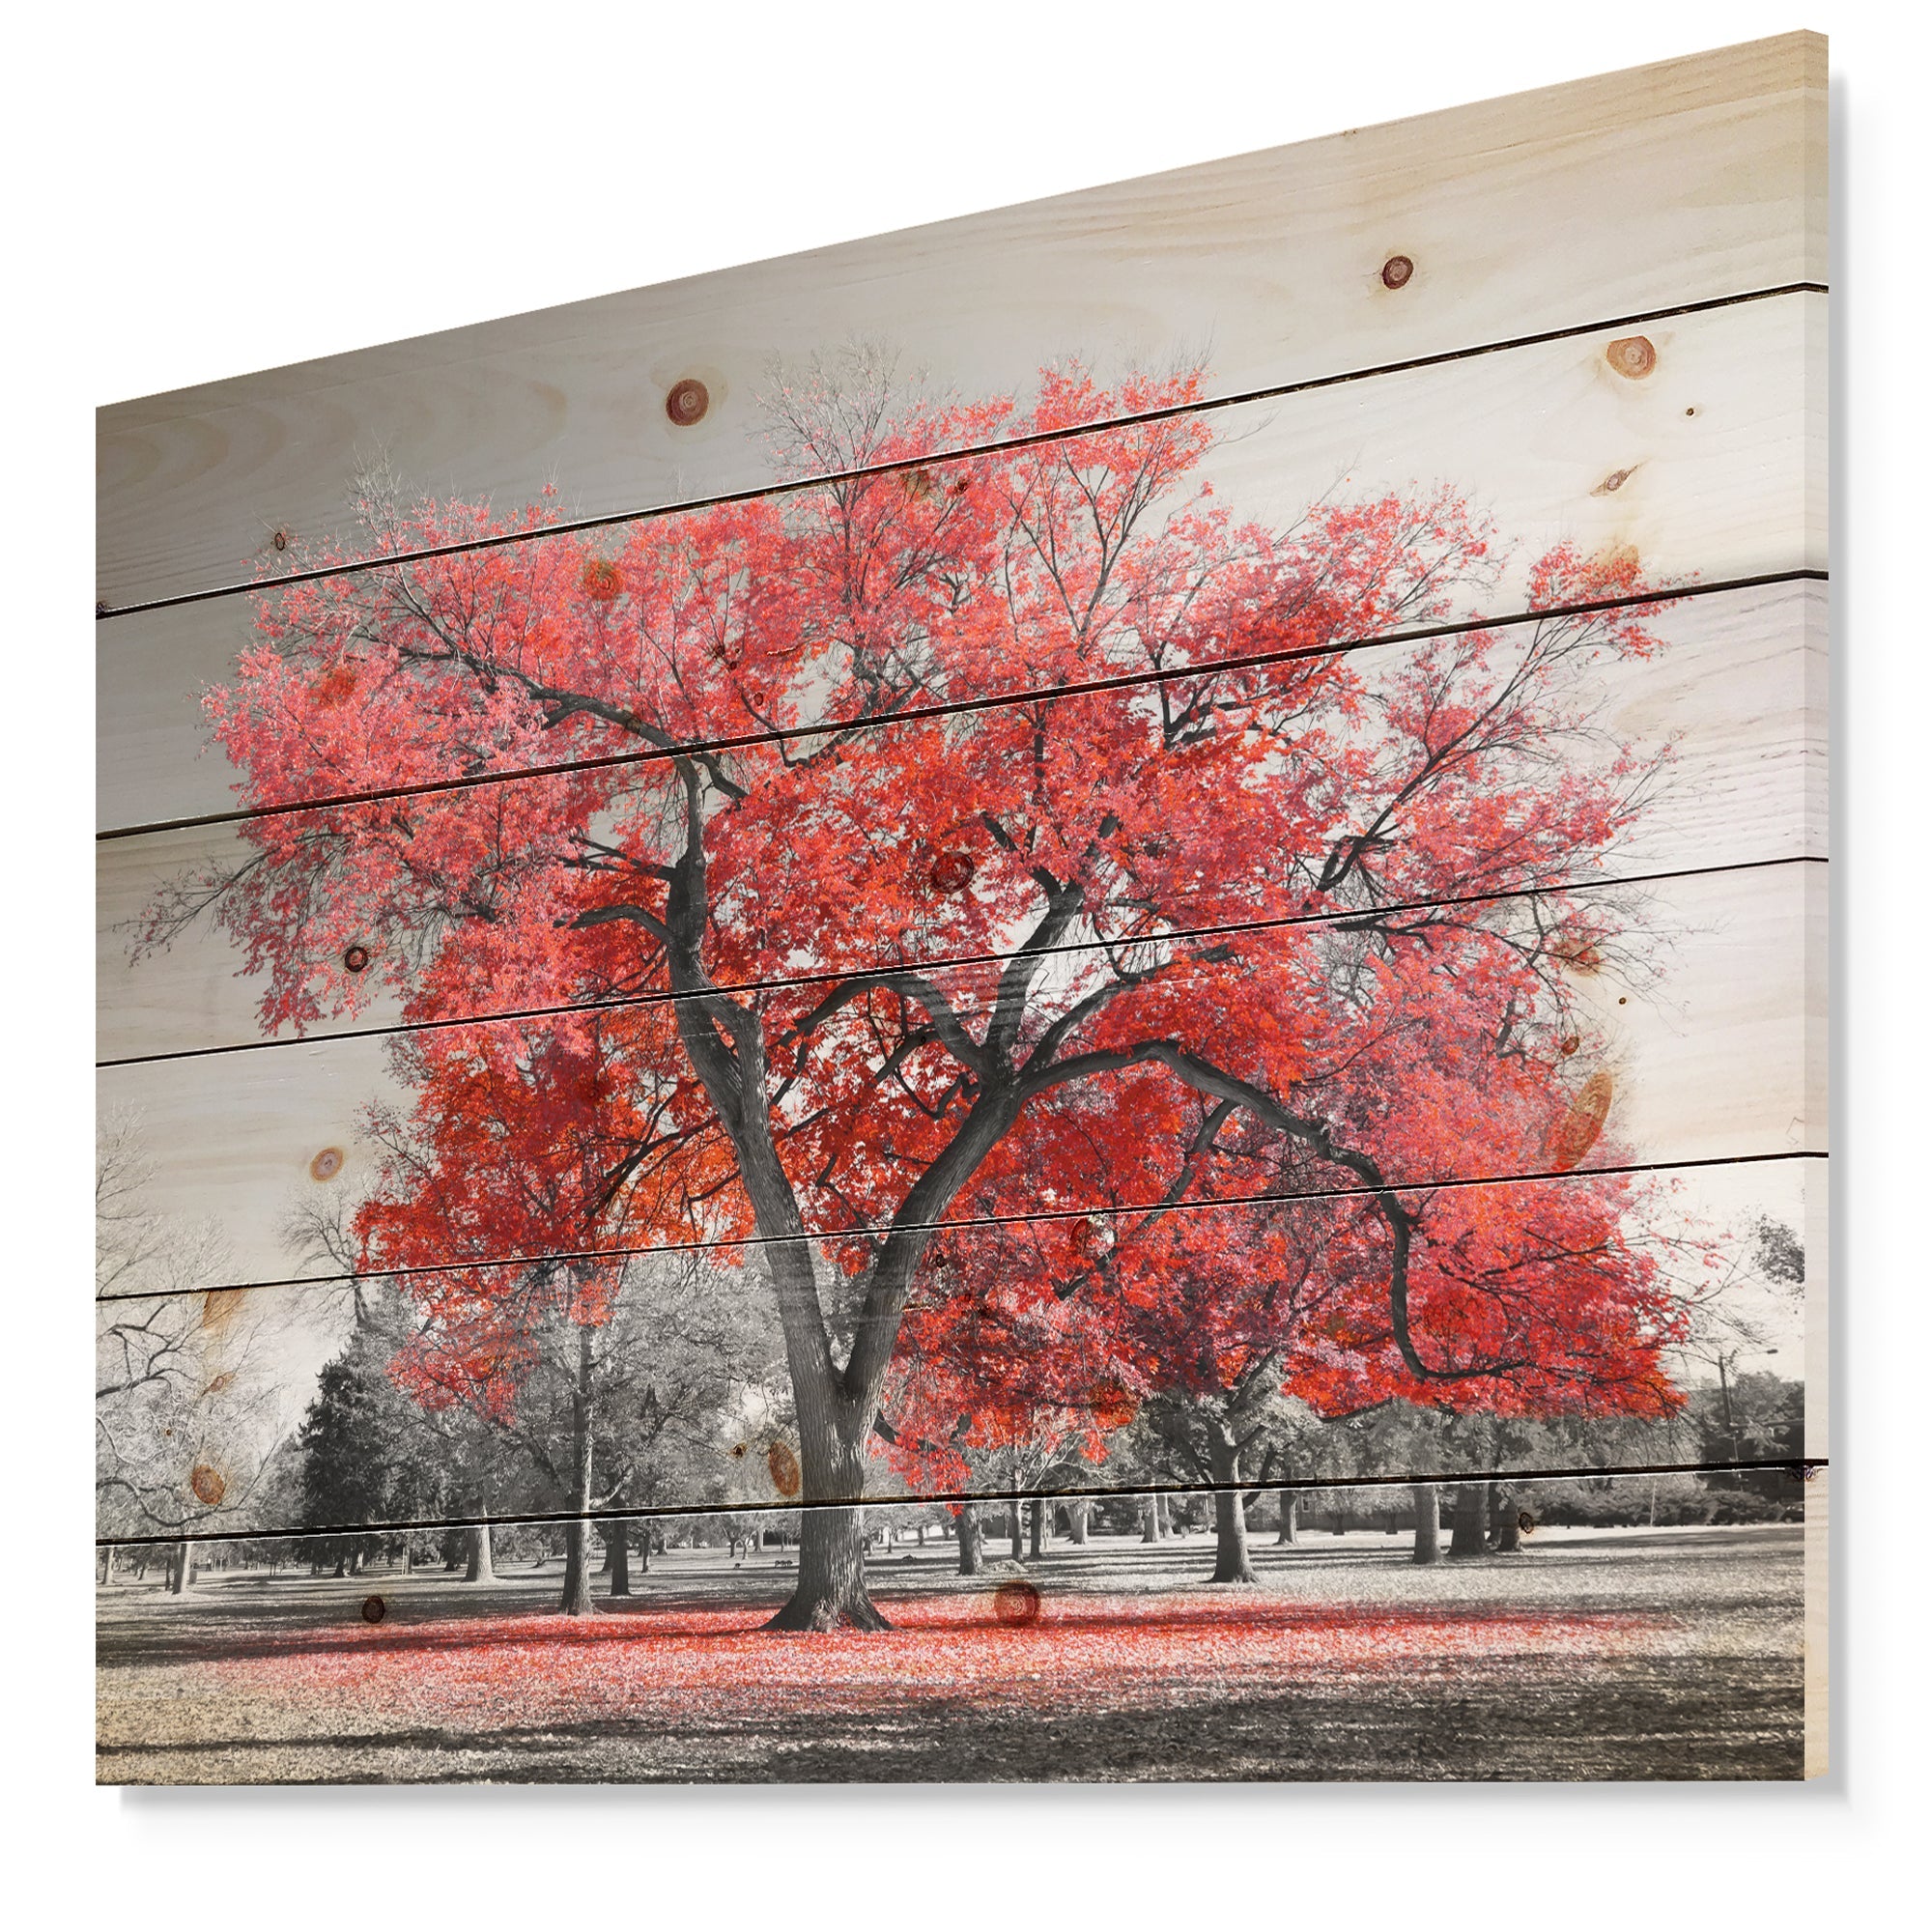 Big Red Tree on Foggy Day - Landscape Print on Natural Pine Wood - 20x15